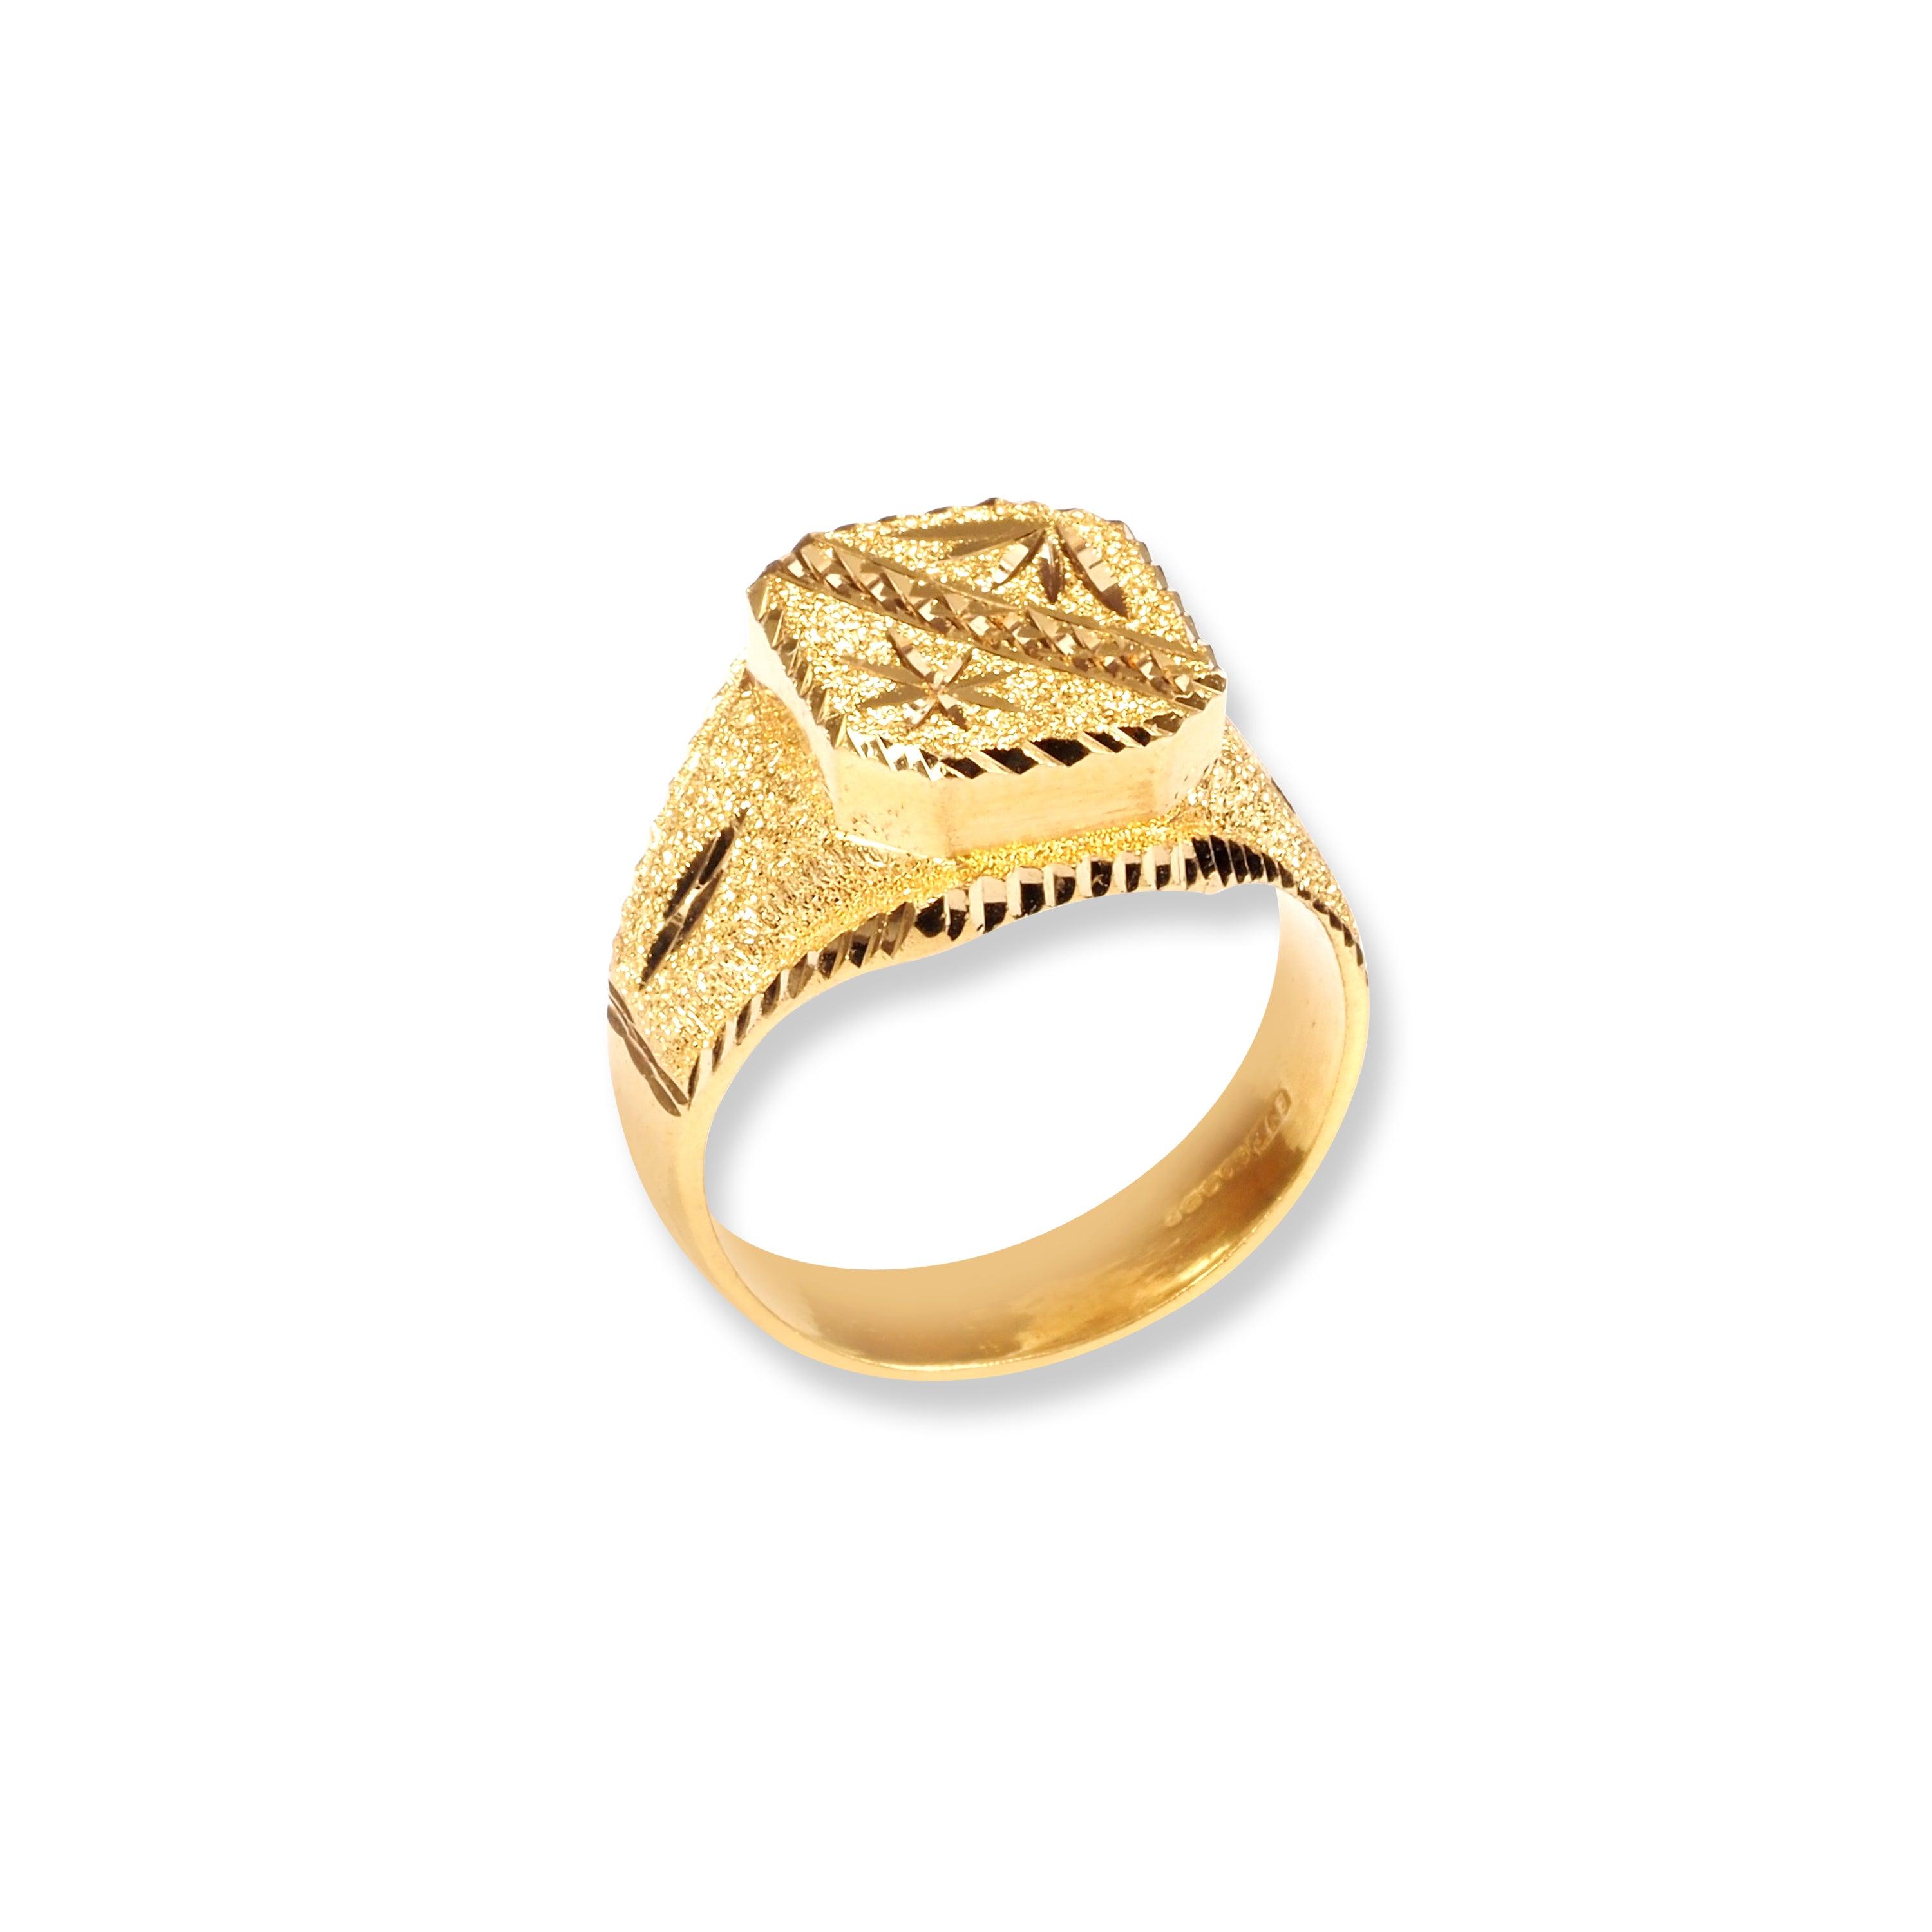 22ct Gold Gents Signet Ring GR-8319 - Minar Jewellers